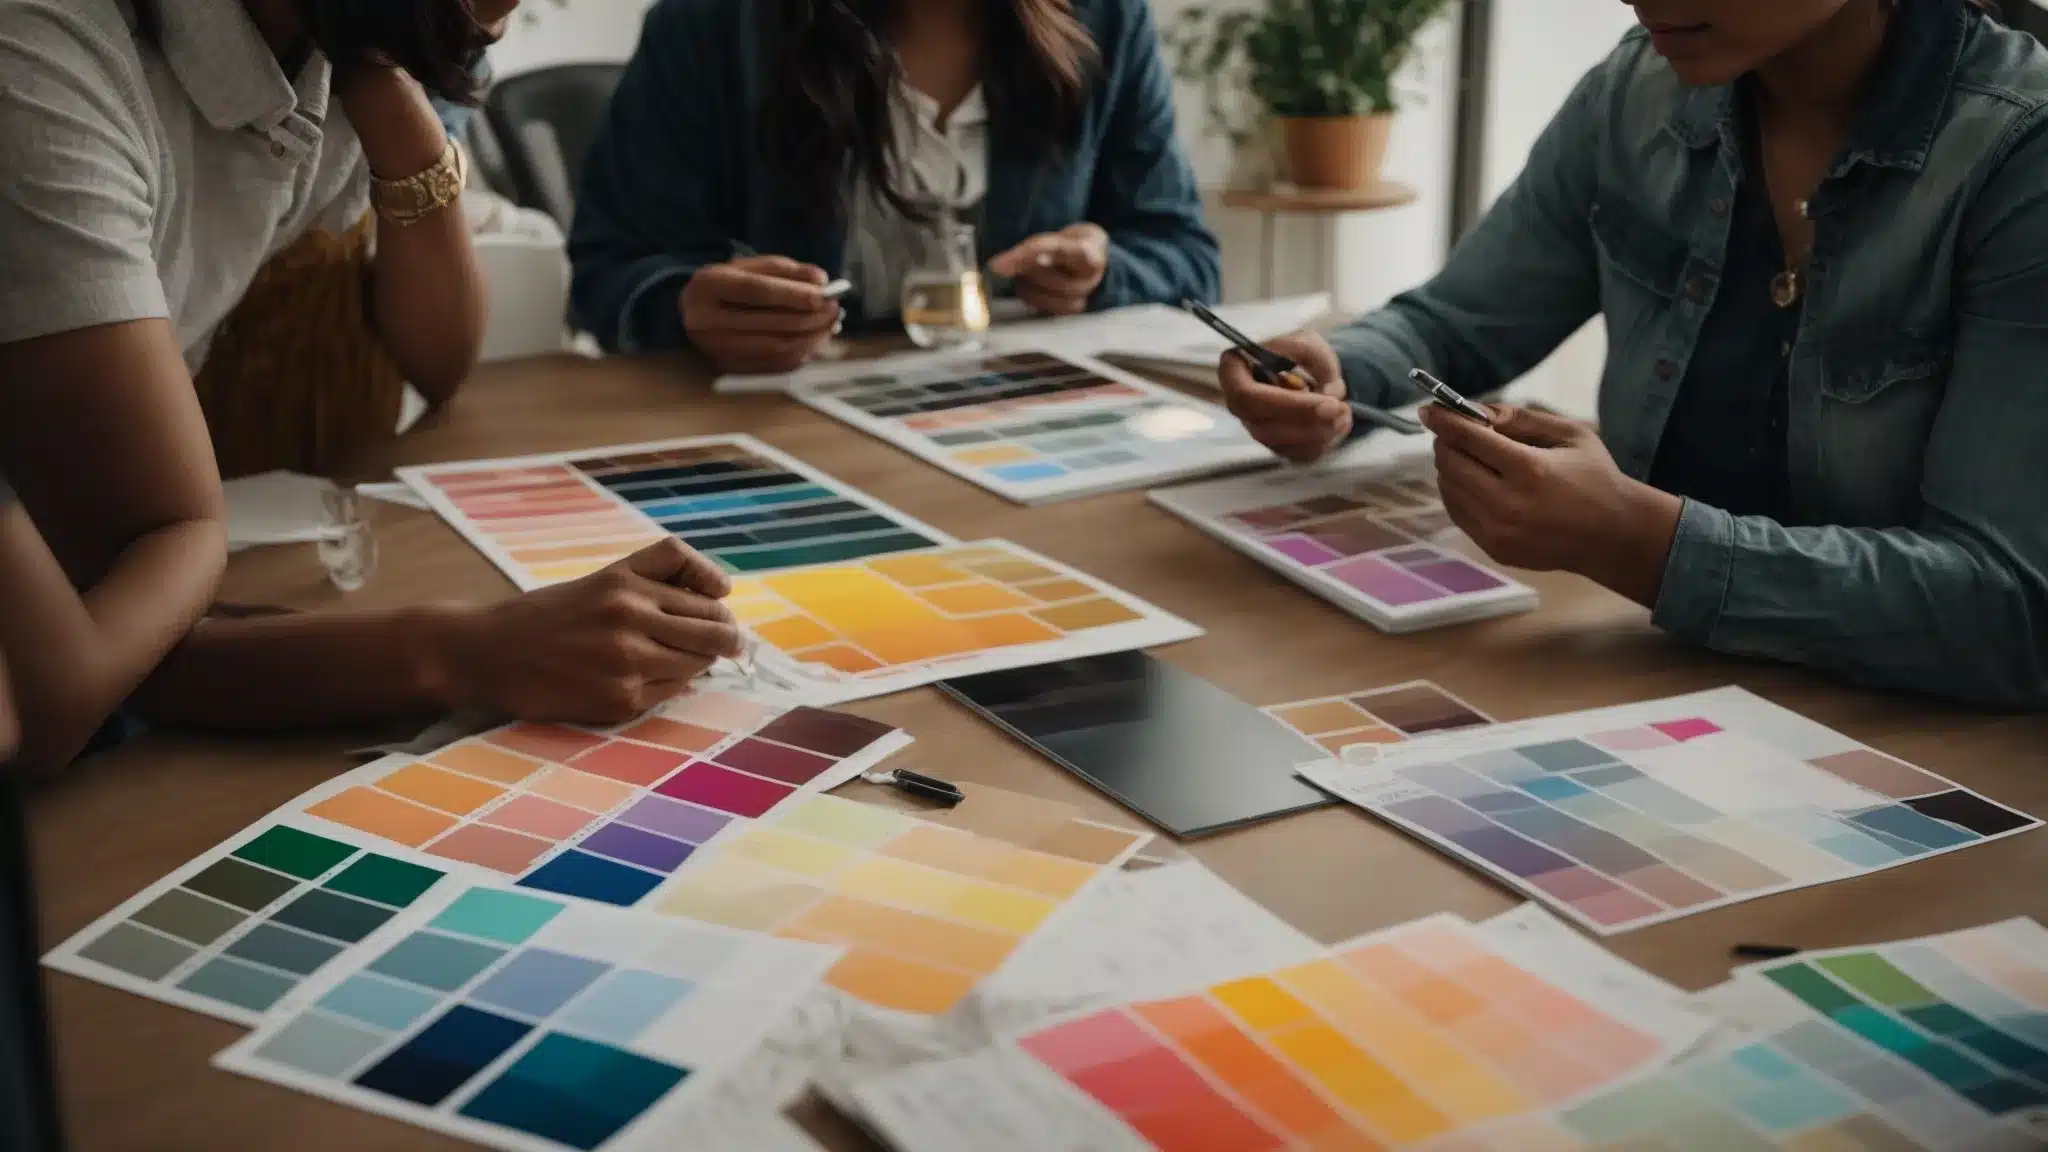 A Creative Team Brainstorming Around A Table With Branding Mock-Ups And Color Palettes.